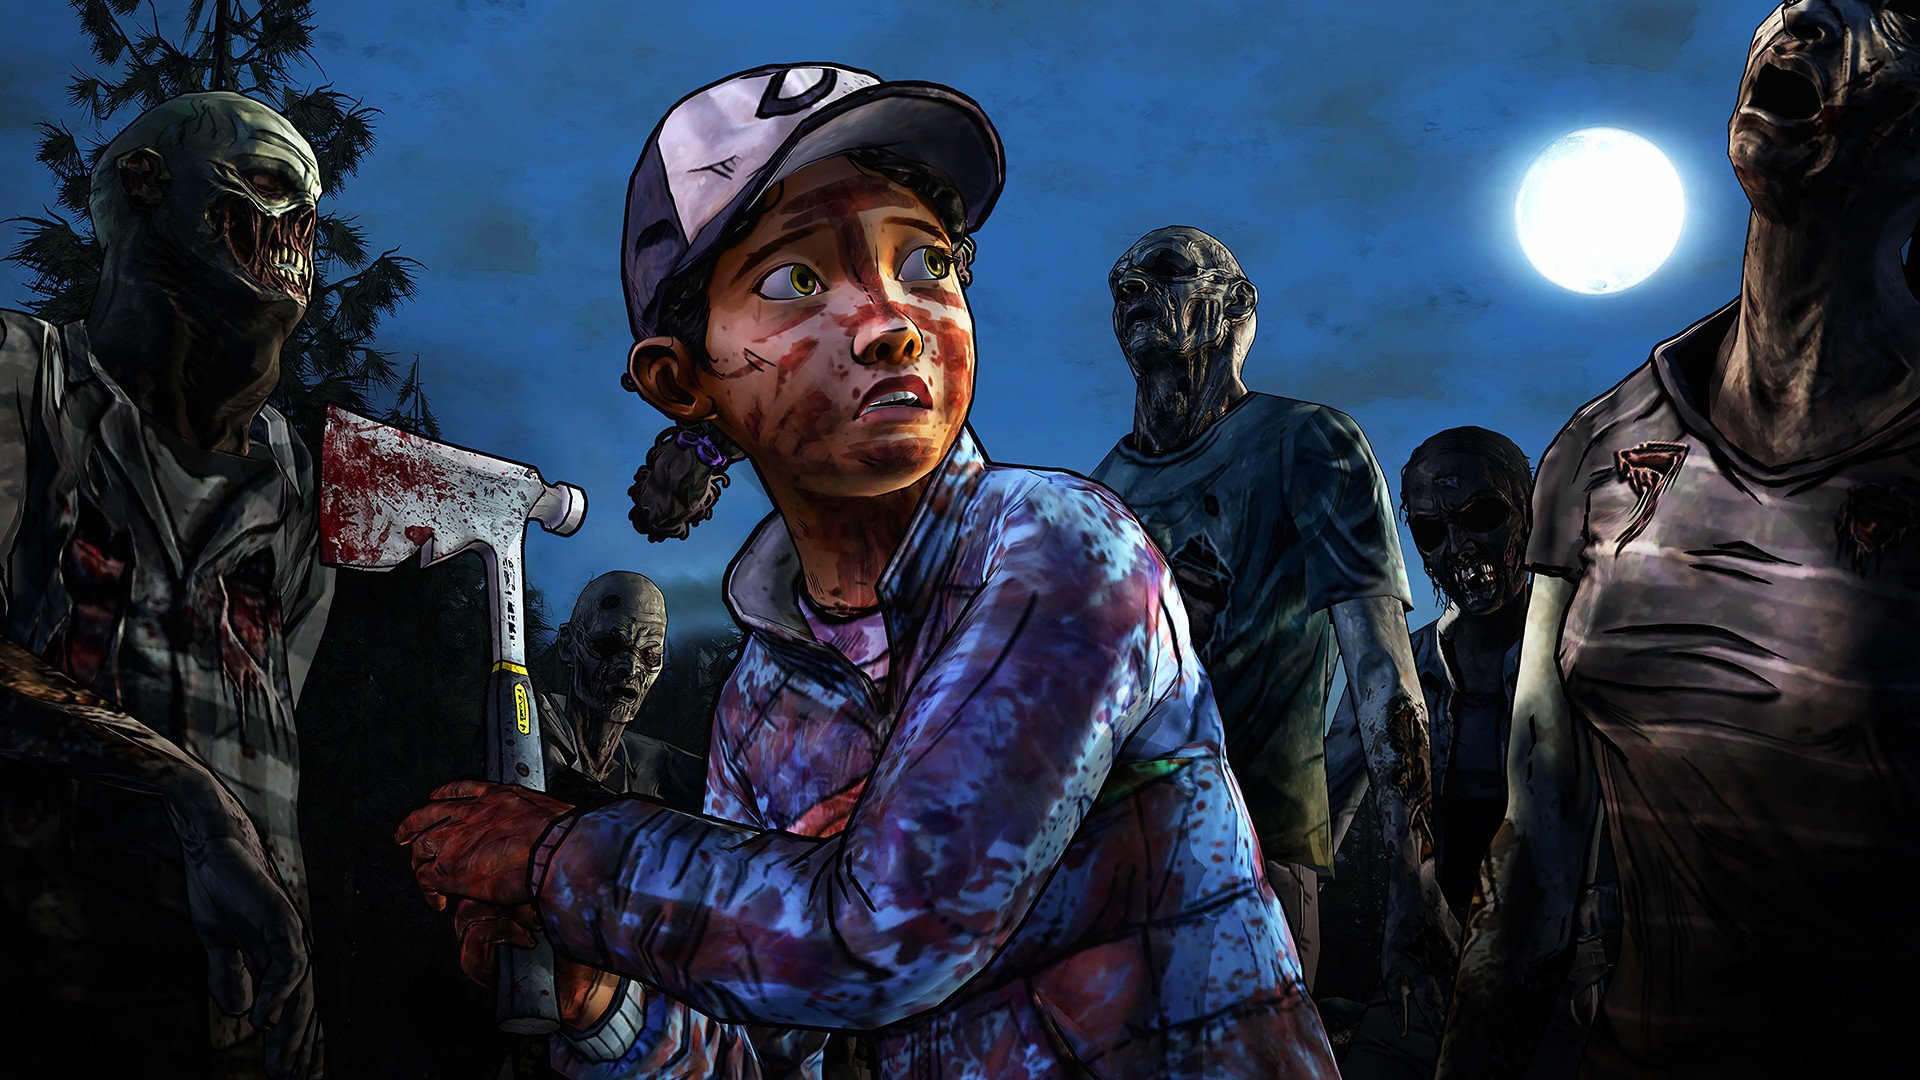 Скриншот *The Walking Dead Collection [PS4] 5.05 / 6.72 / 7.02 [EUR] (2017) [Русский] (v1.03)*